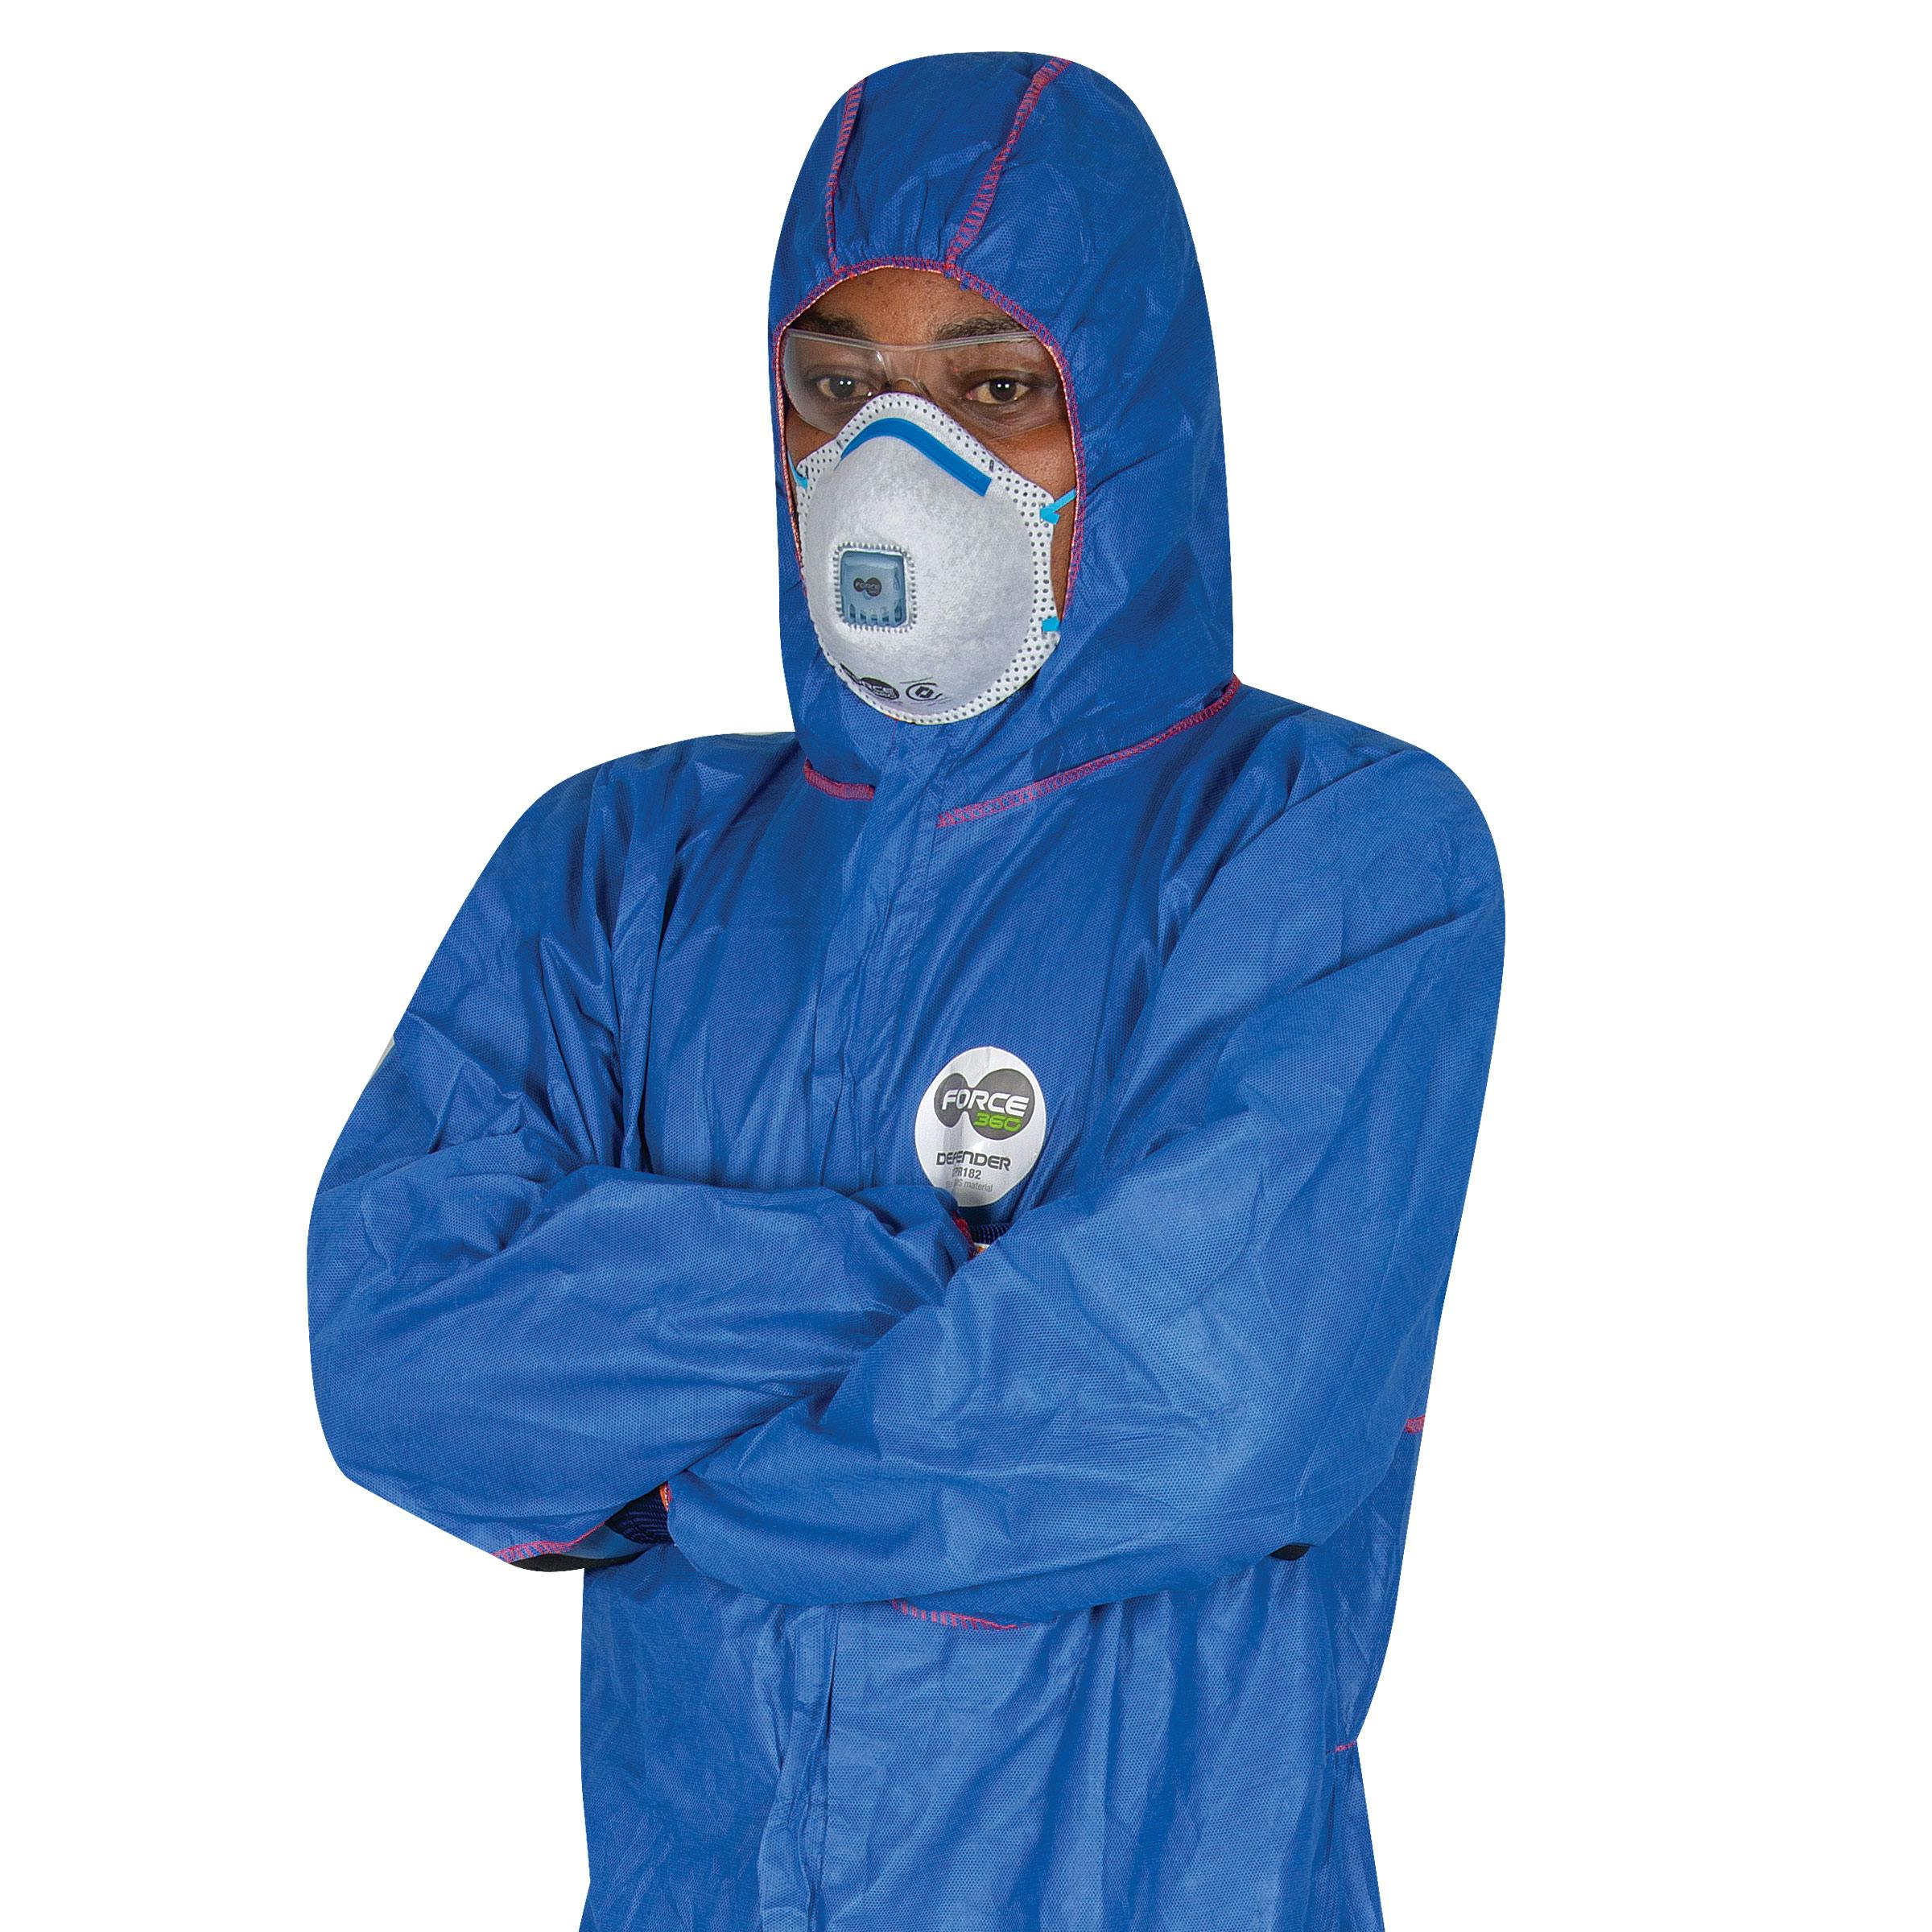 Force360 Defender Type 5,6 Coverall - Blue (Blue)